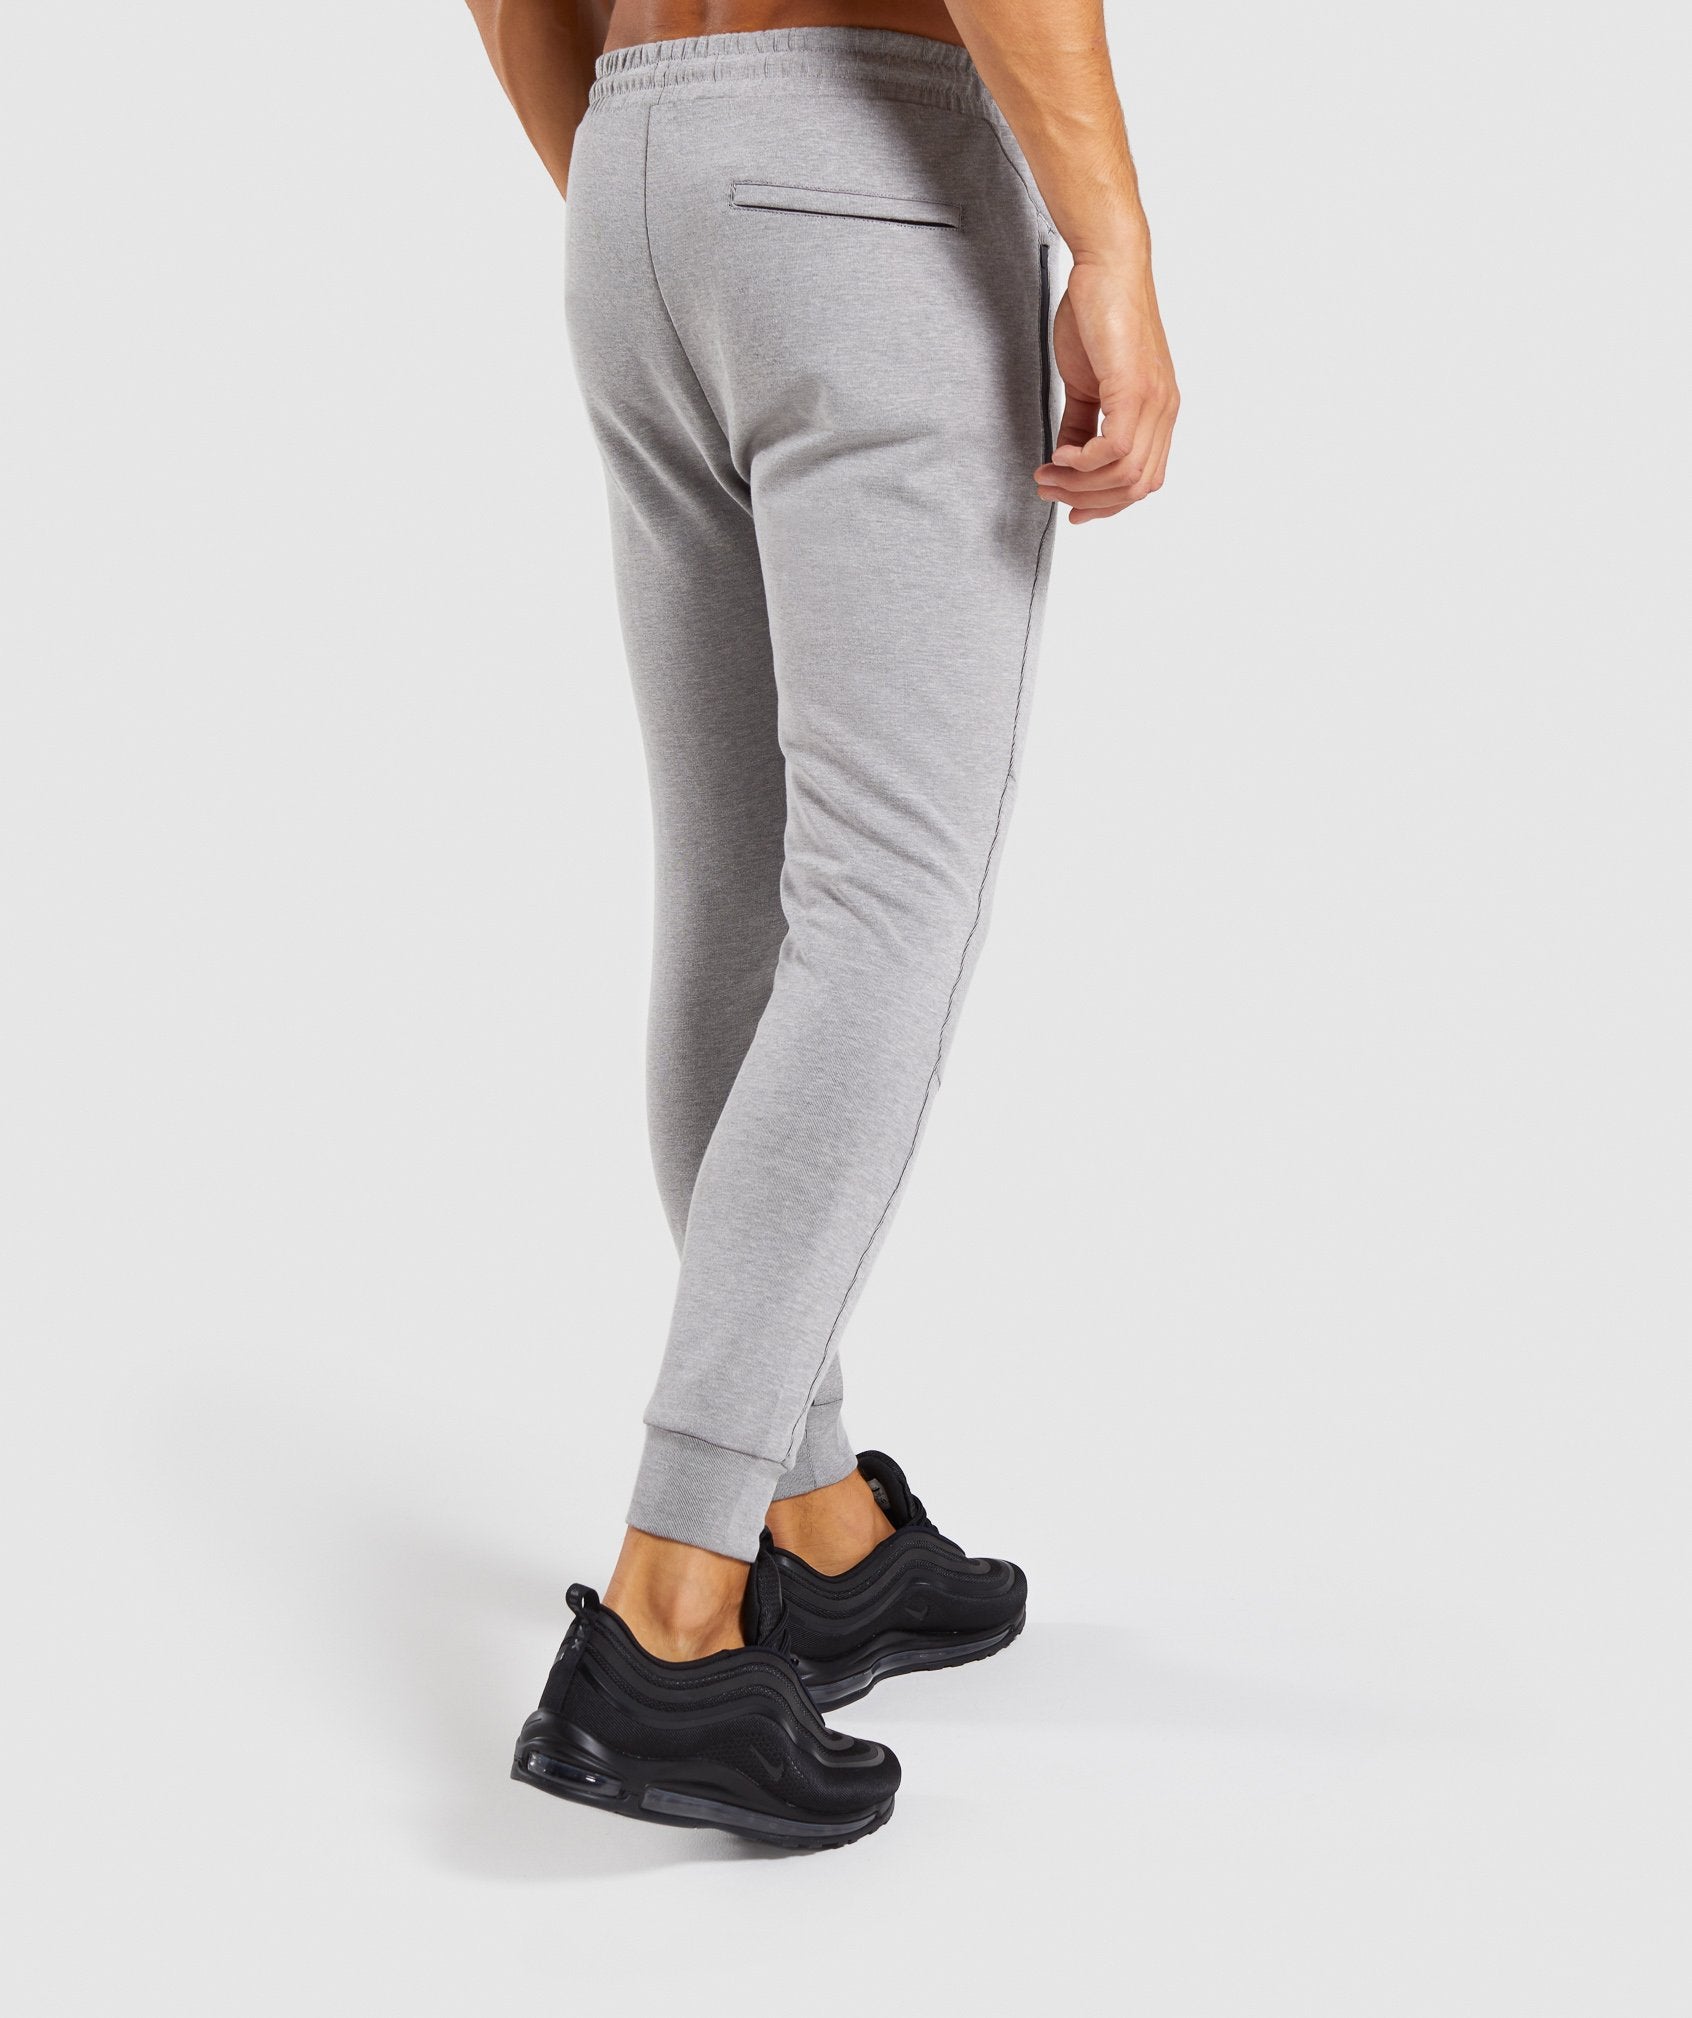 Take Over Bottoms in Light Grey Marl - view 2